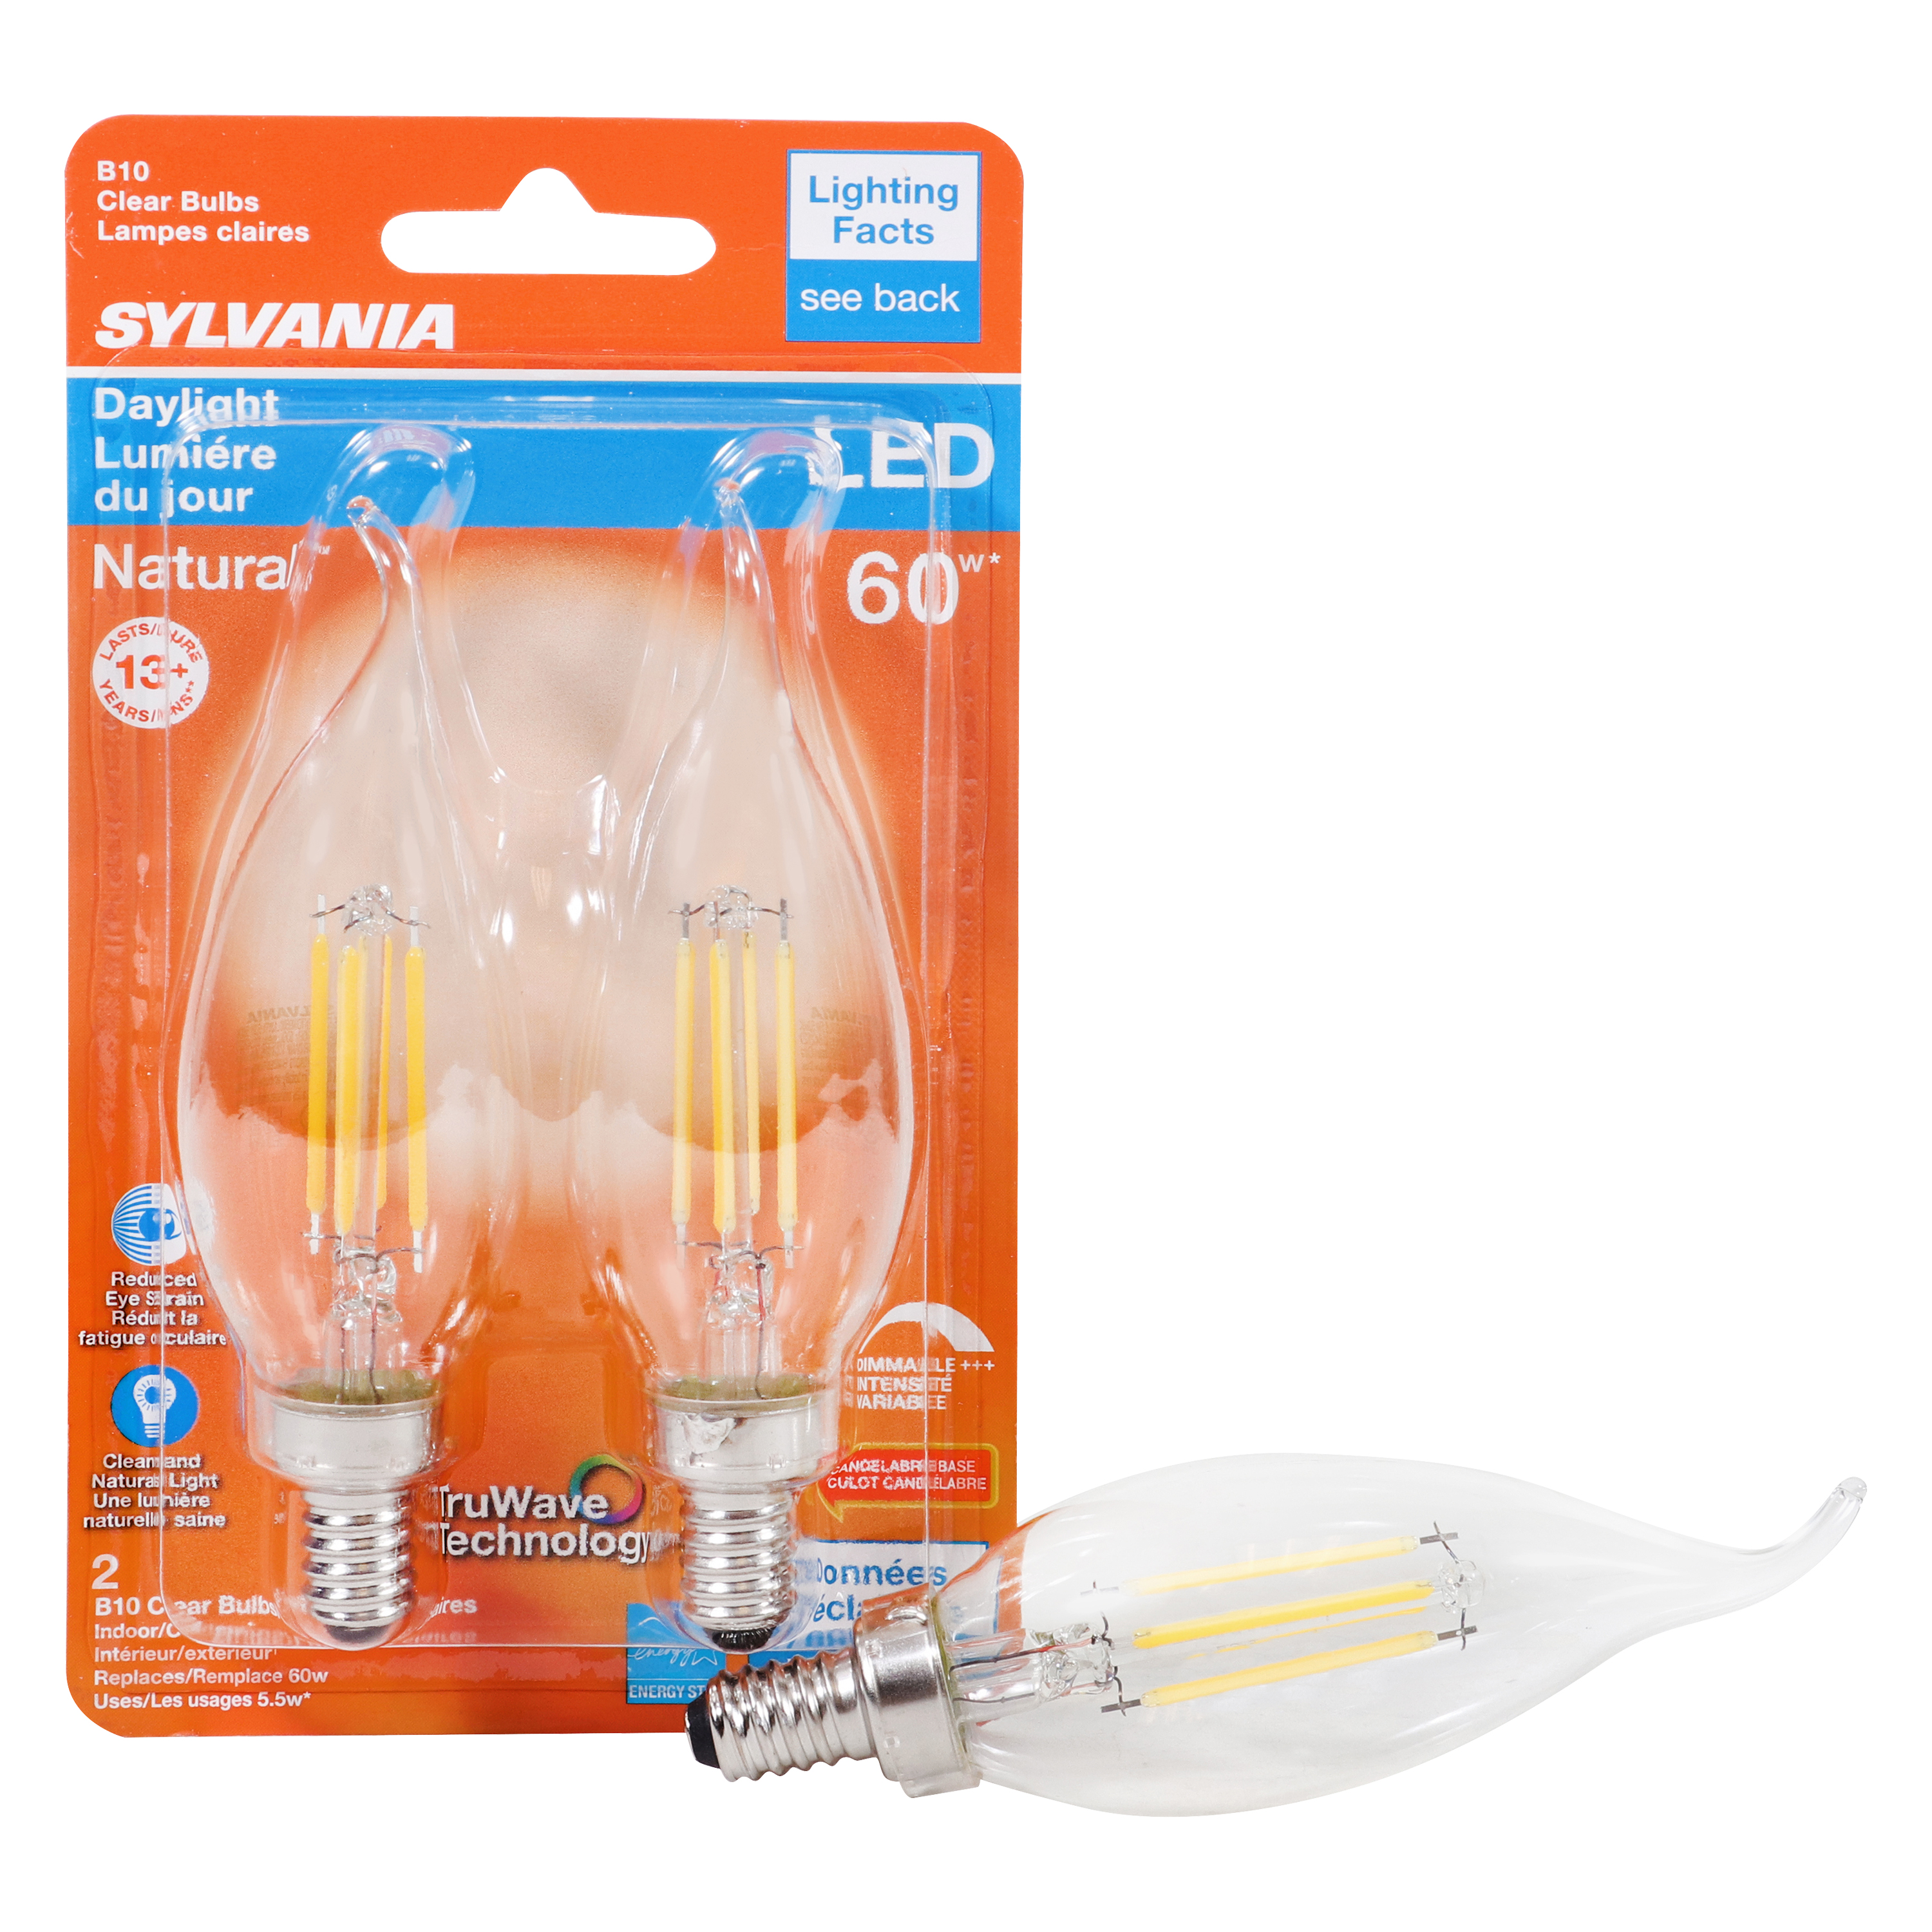 Sylvania 40759 Natural LED Bulb, Decorative, B10 Bent Tip Lamp, 60 W Equivalent, E12 Lamp Base, Dimmable, Clear